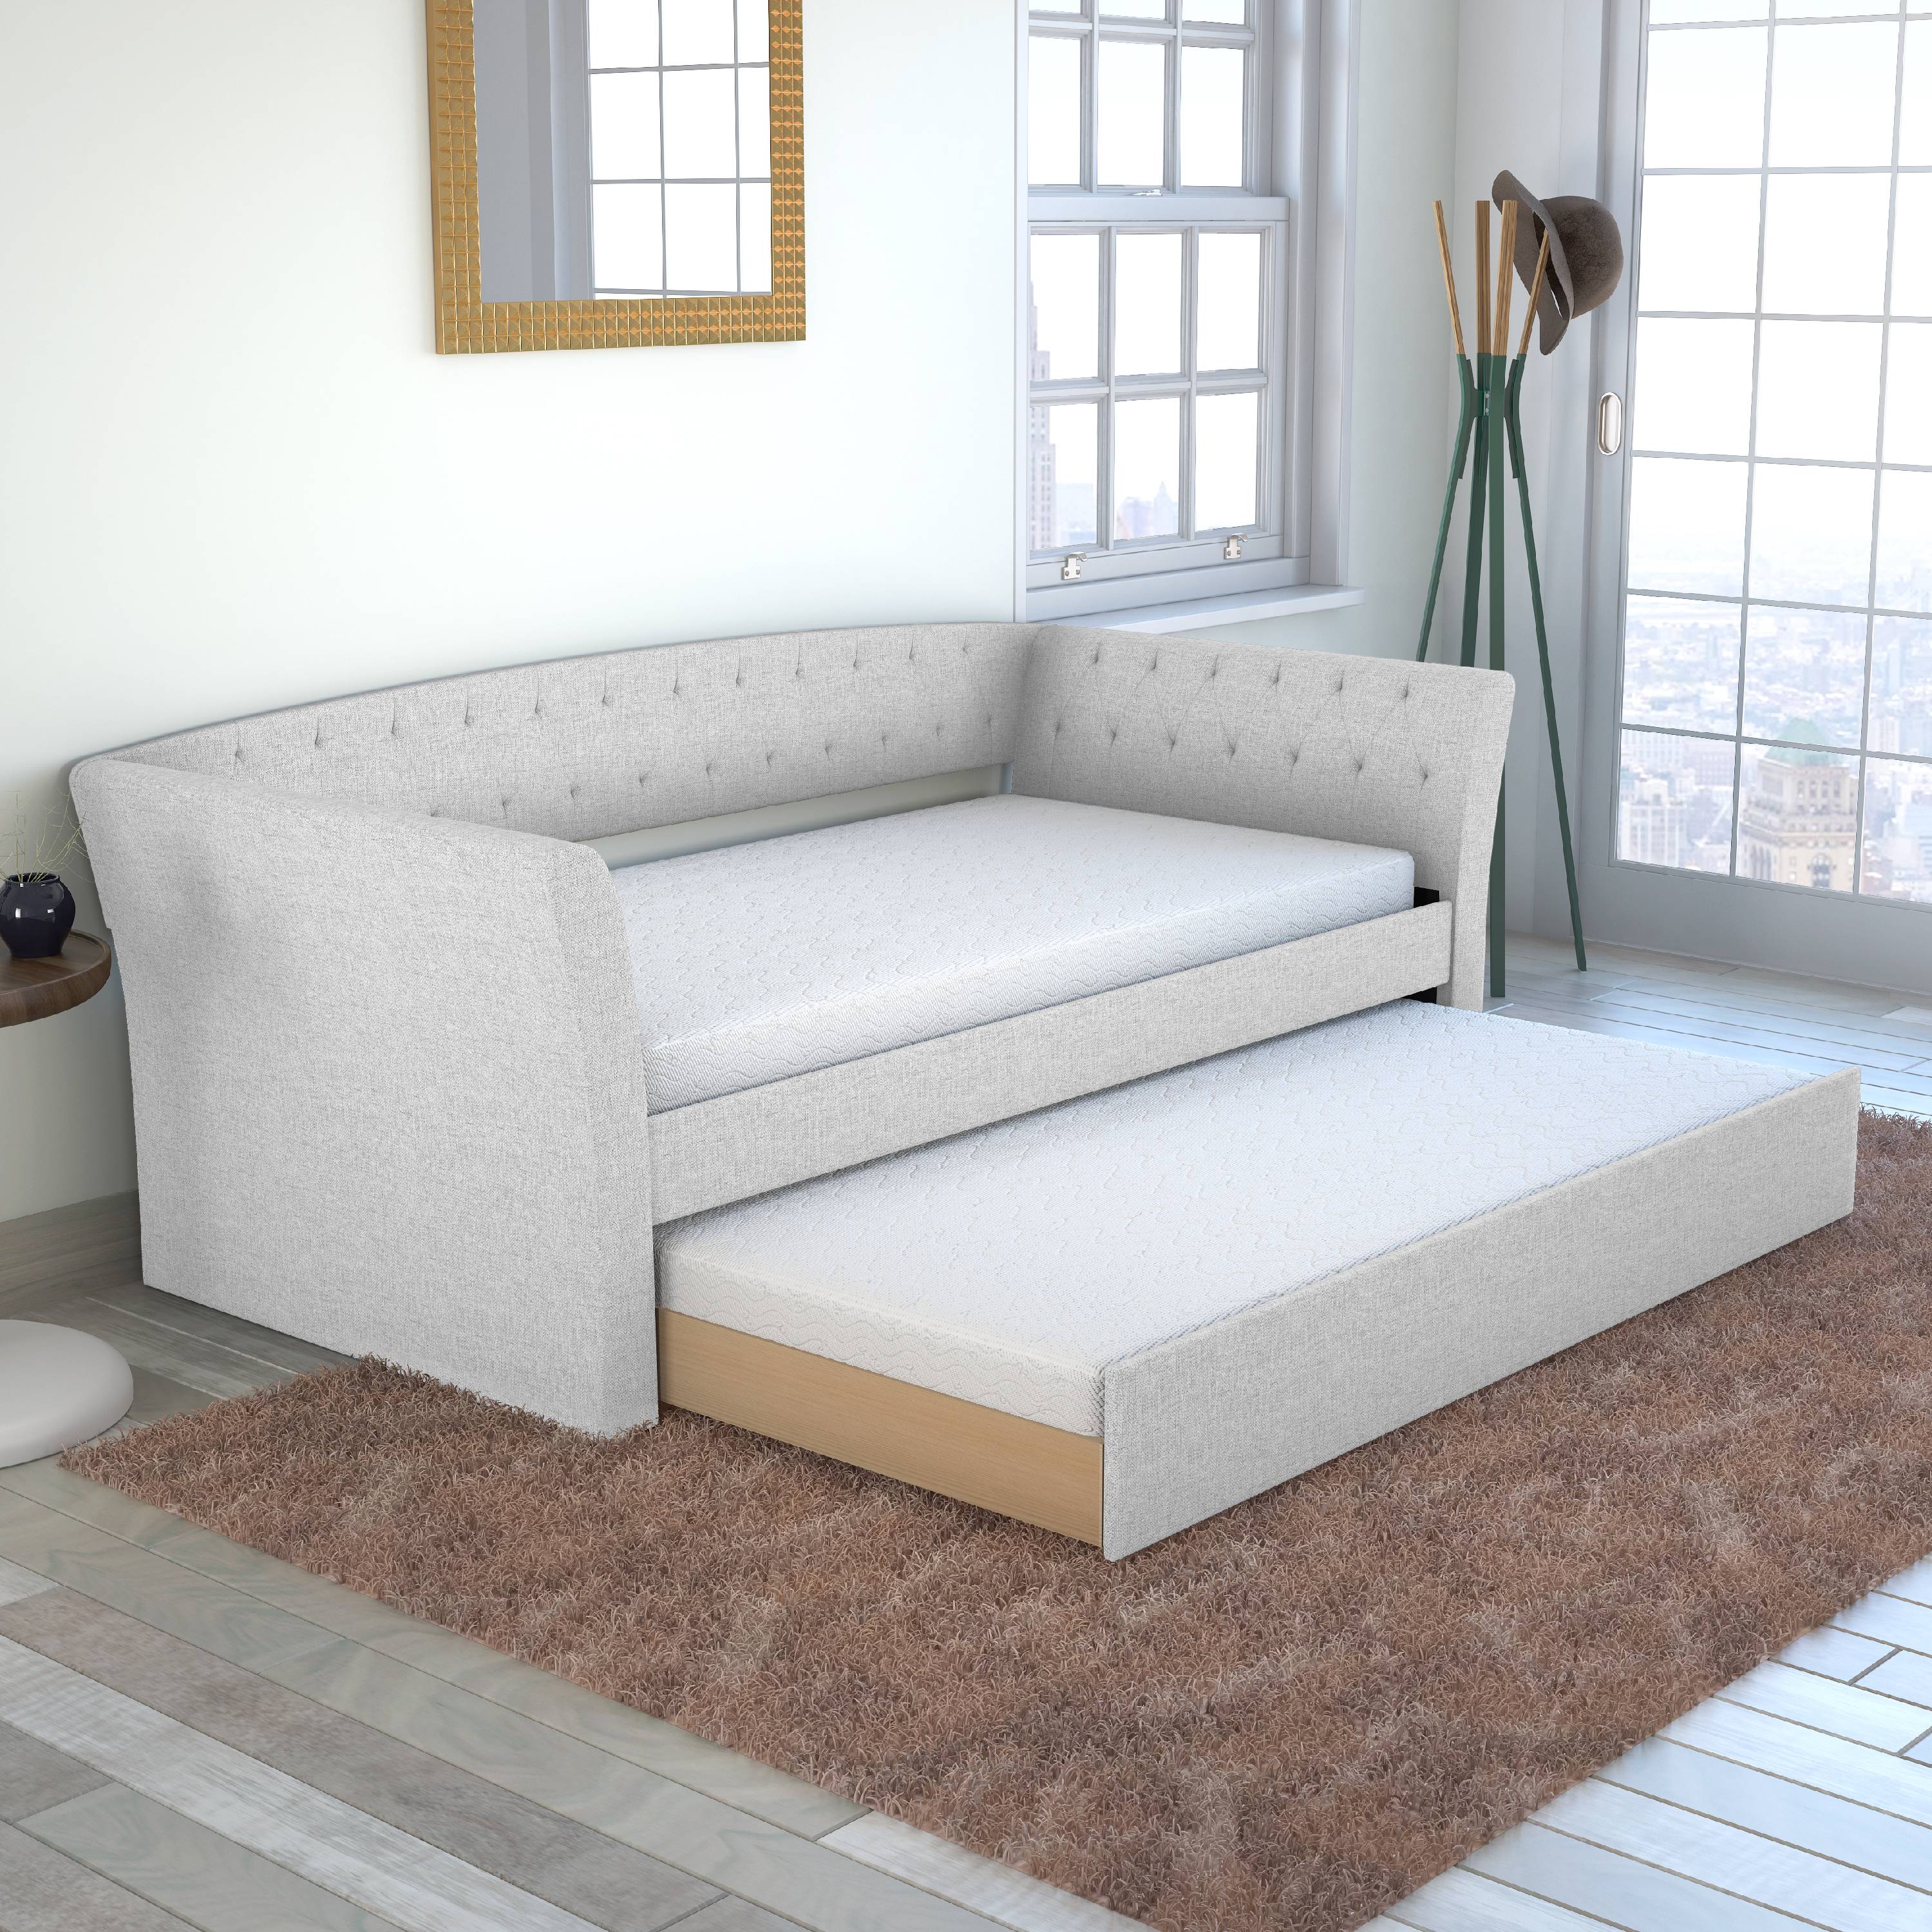 Premier New Hampton White Tufted Upholstered Daybed with Trundle Bed in Twin Size